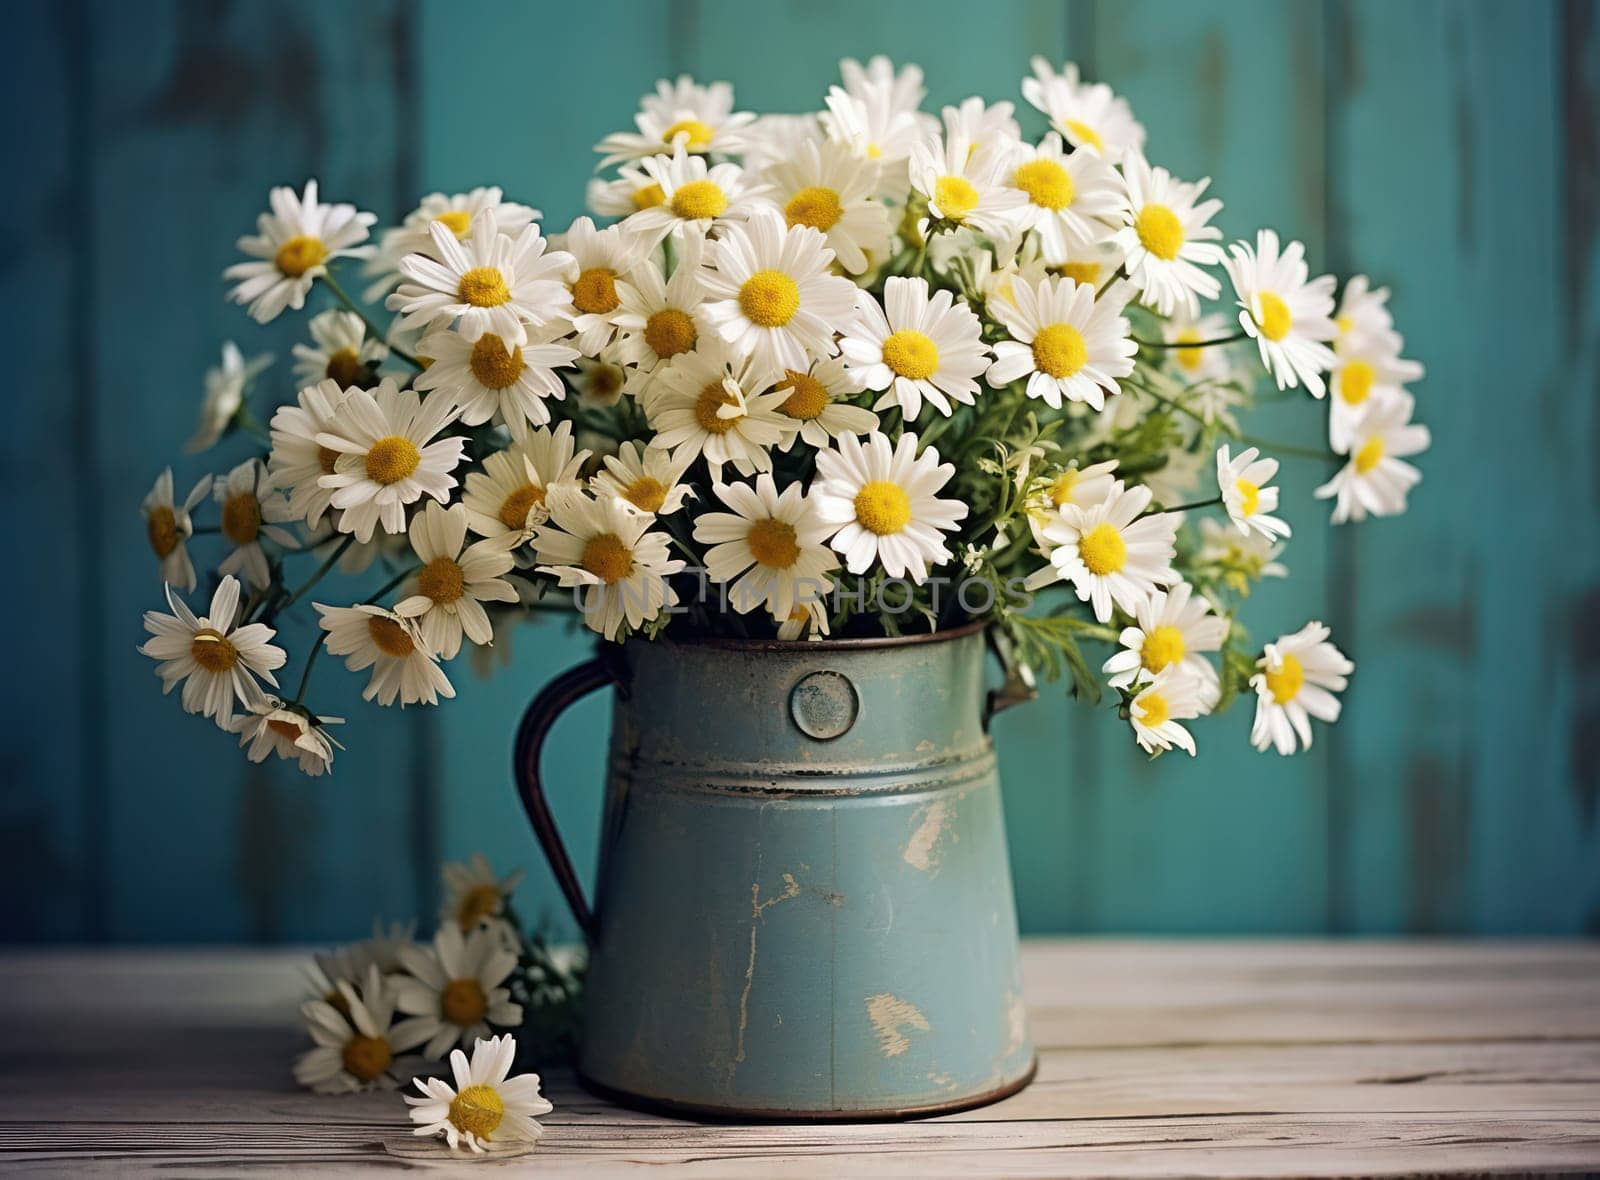 Floral Beauty: A Bouquet of White Daisies and Chamomile in a Rustic Wooden Vase, Blossoming in a Vibrant Garden